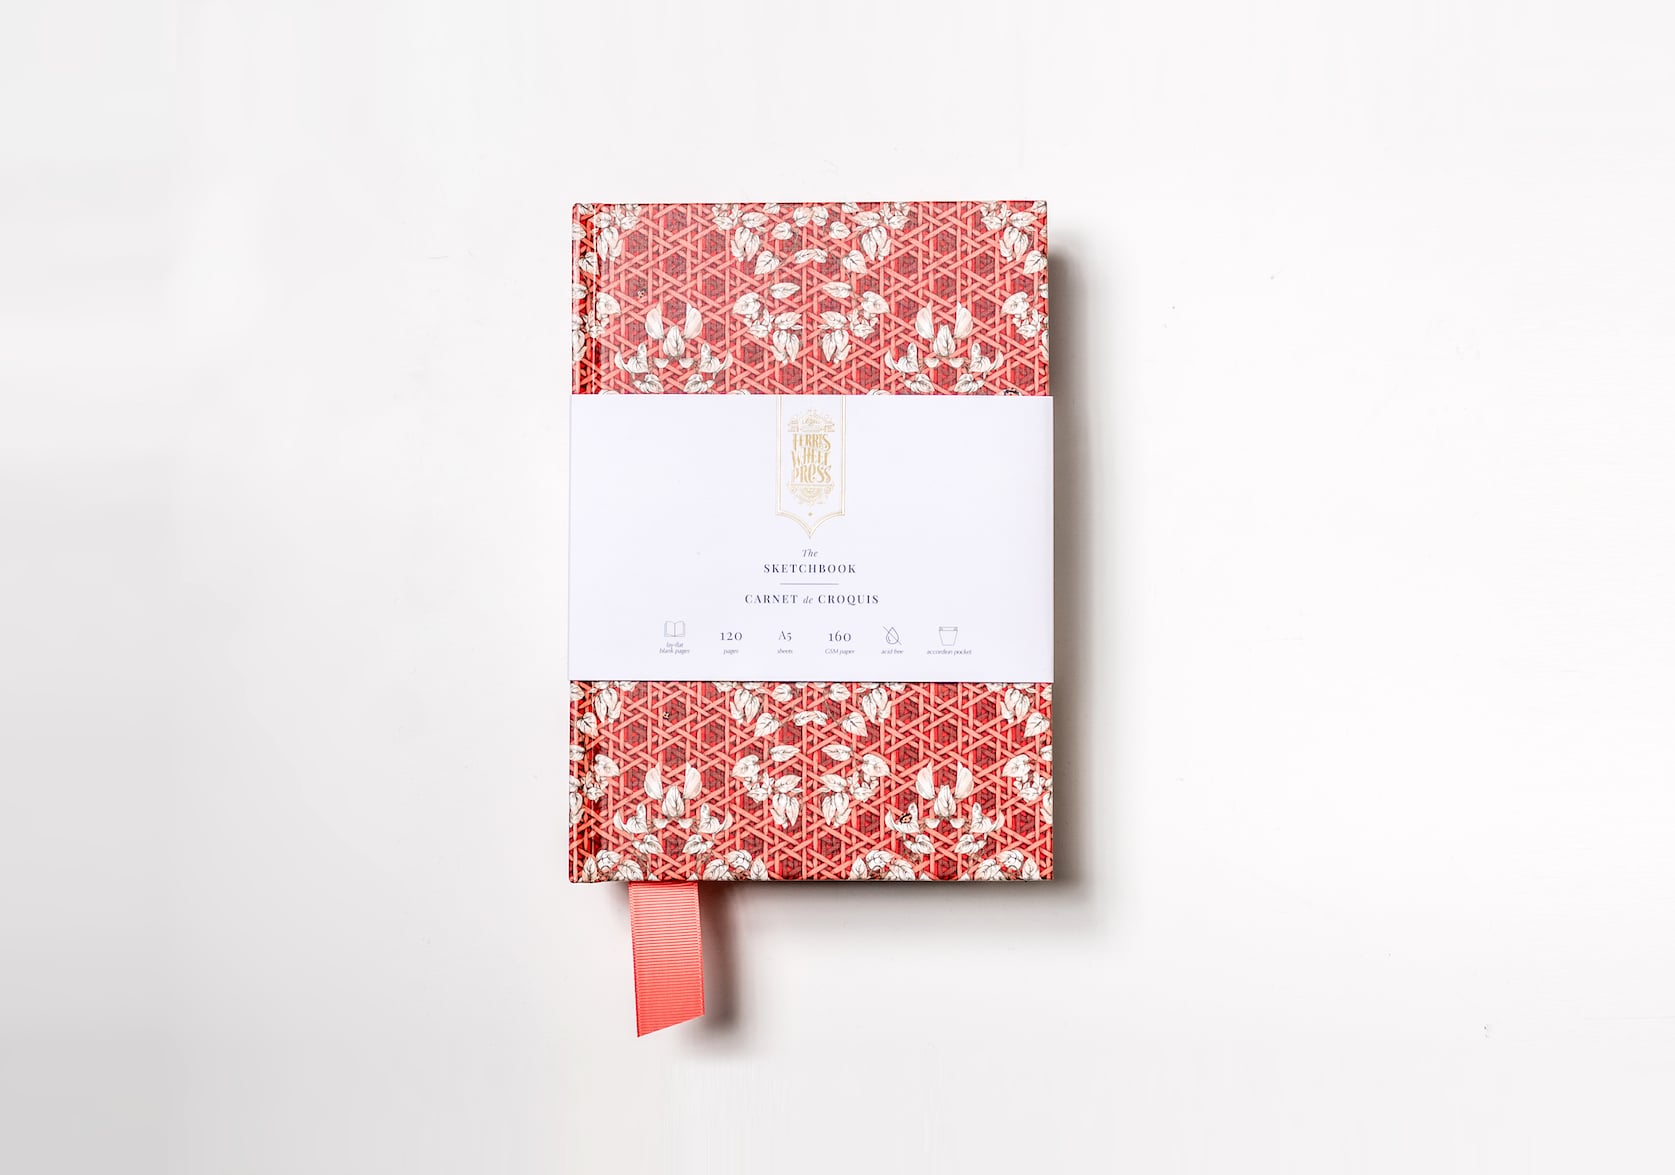 A red sketchbook covered in paper with a hand-illustrated rattan pattern featuring a red fabric ribbon sticking out of the bottom. Gold text on the notebook's packaging reads: Ferris Wheel Press logo. The Sketchbook. Carnet de Croquis.